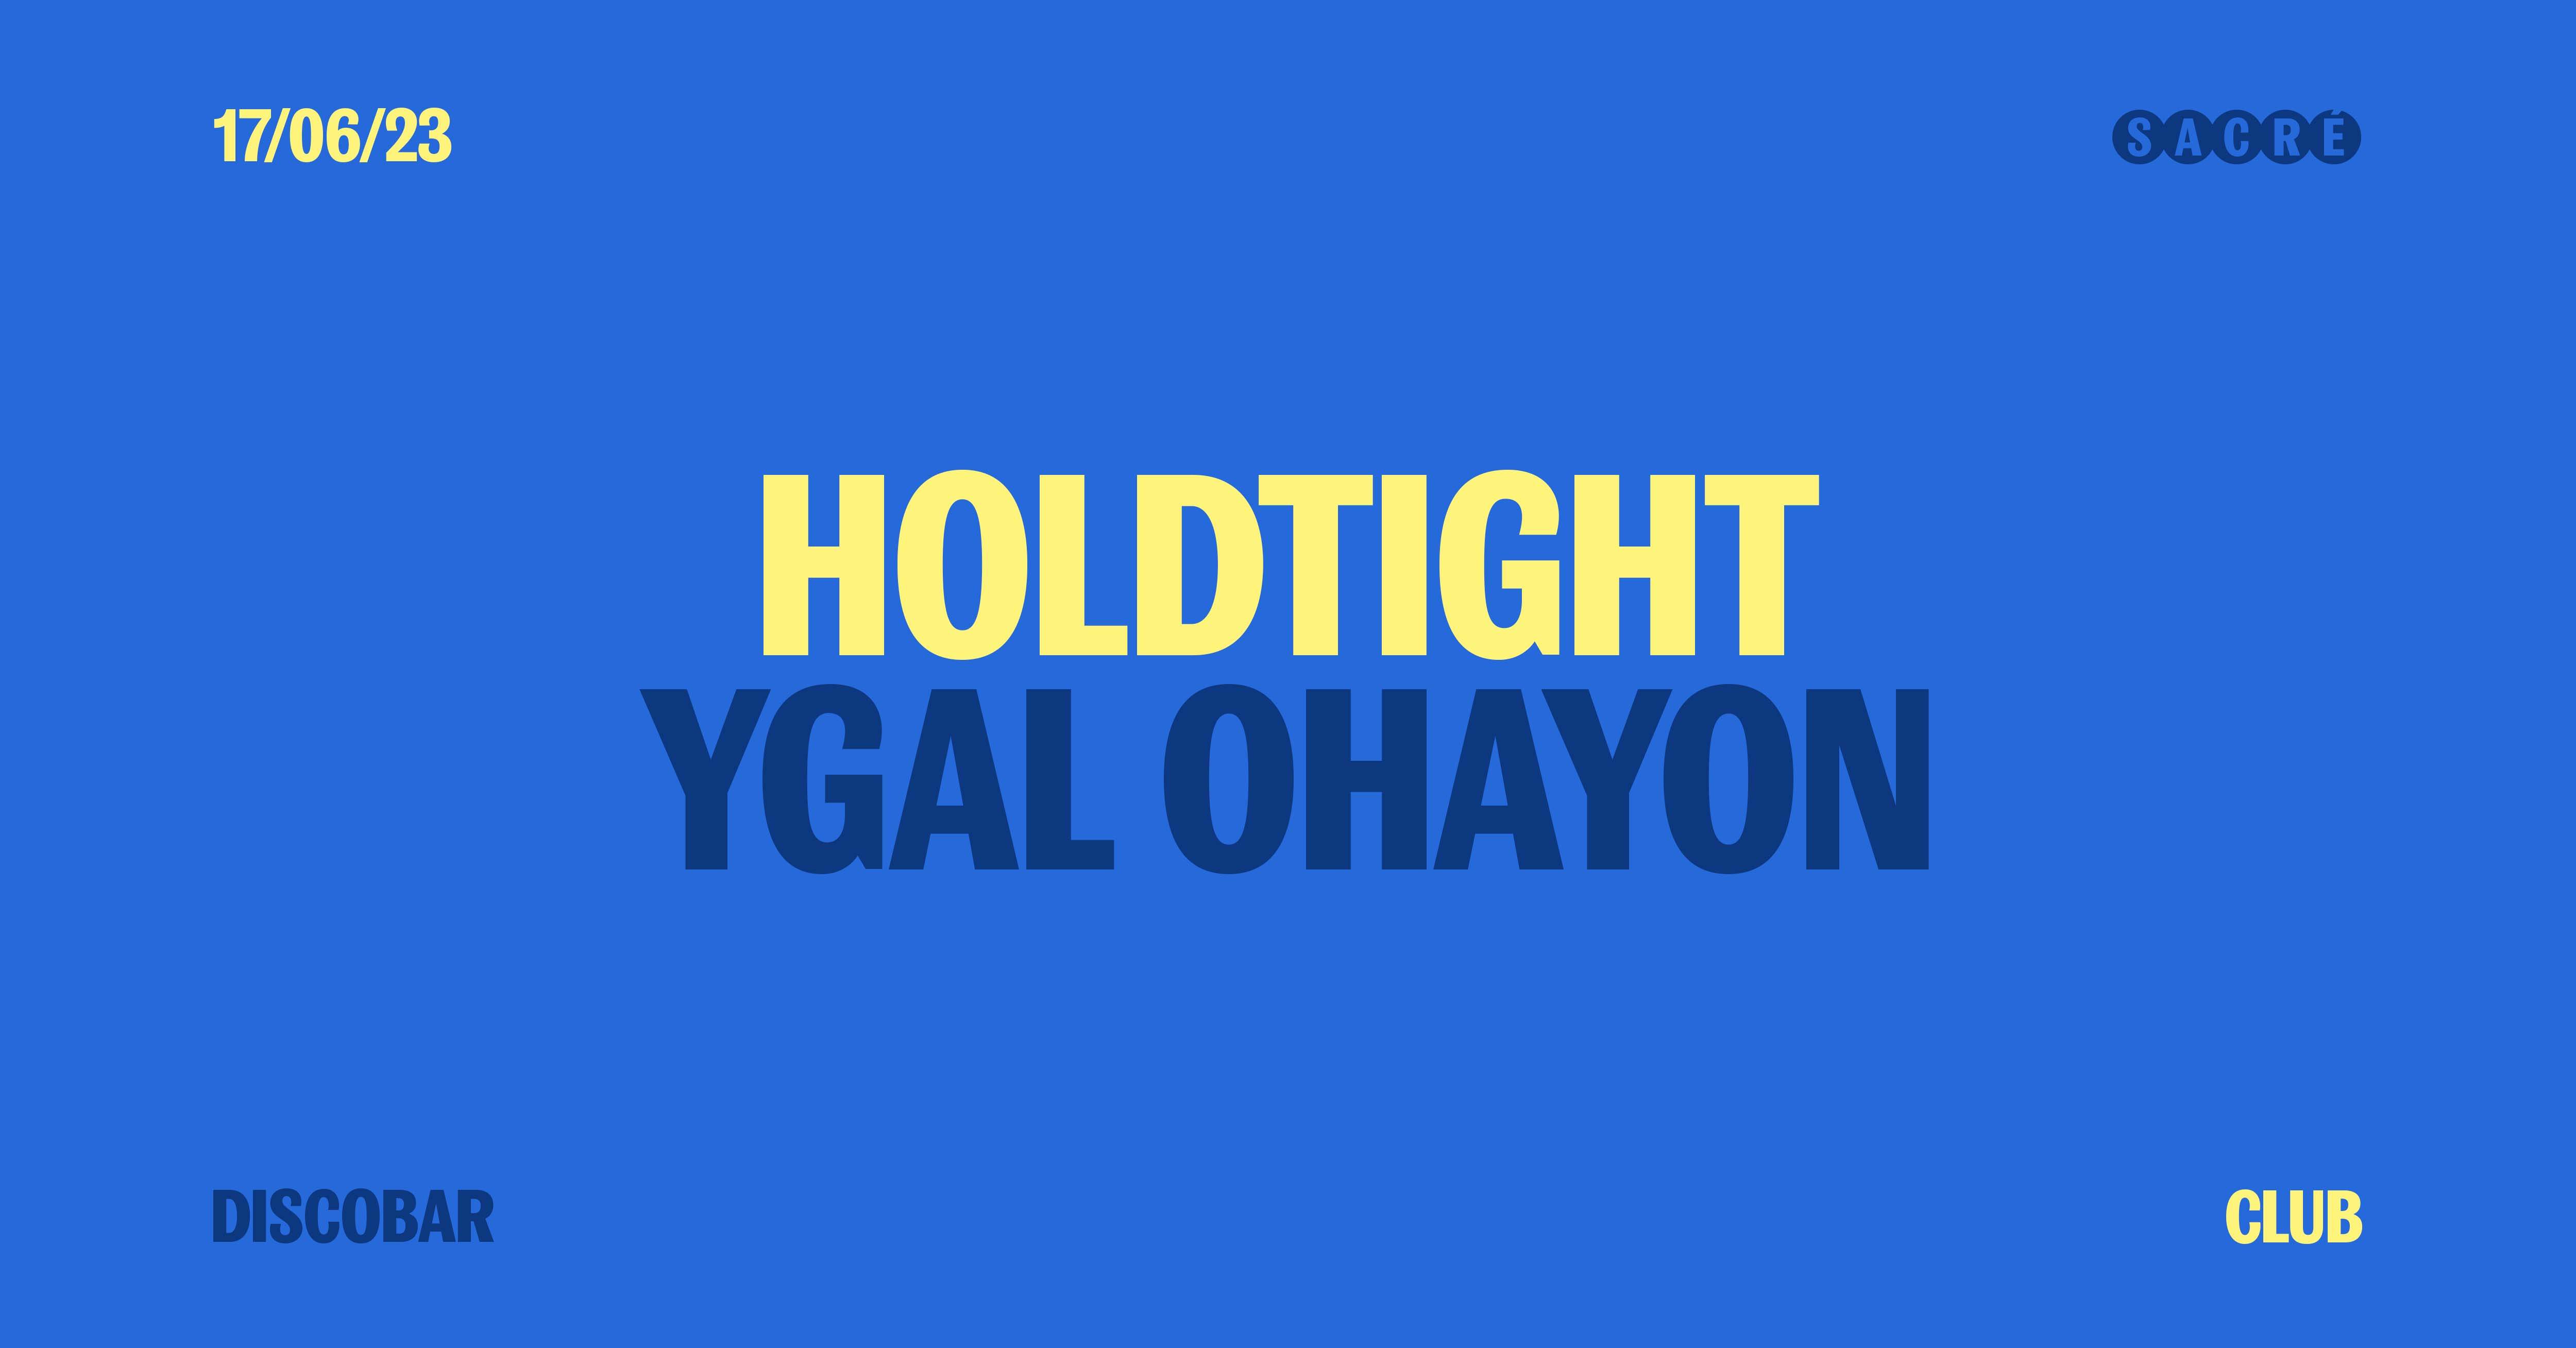 HOLDTight, Ygal Ohayon - フライヤー表